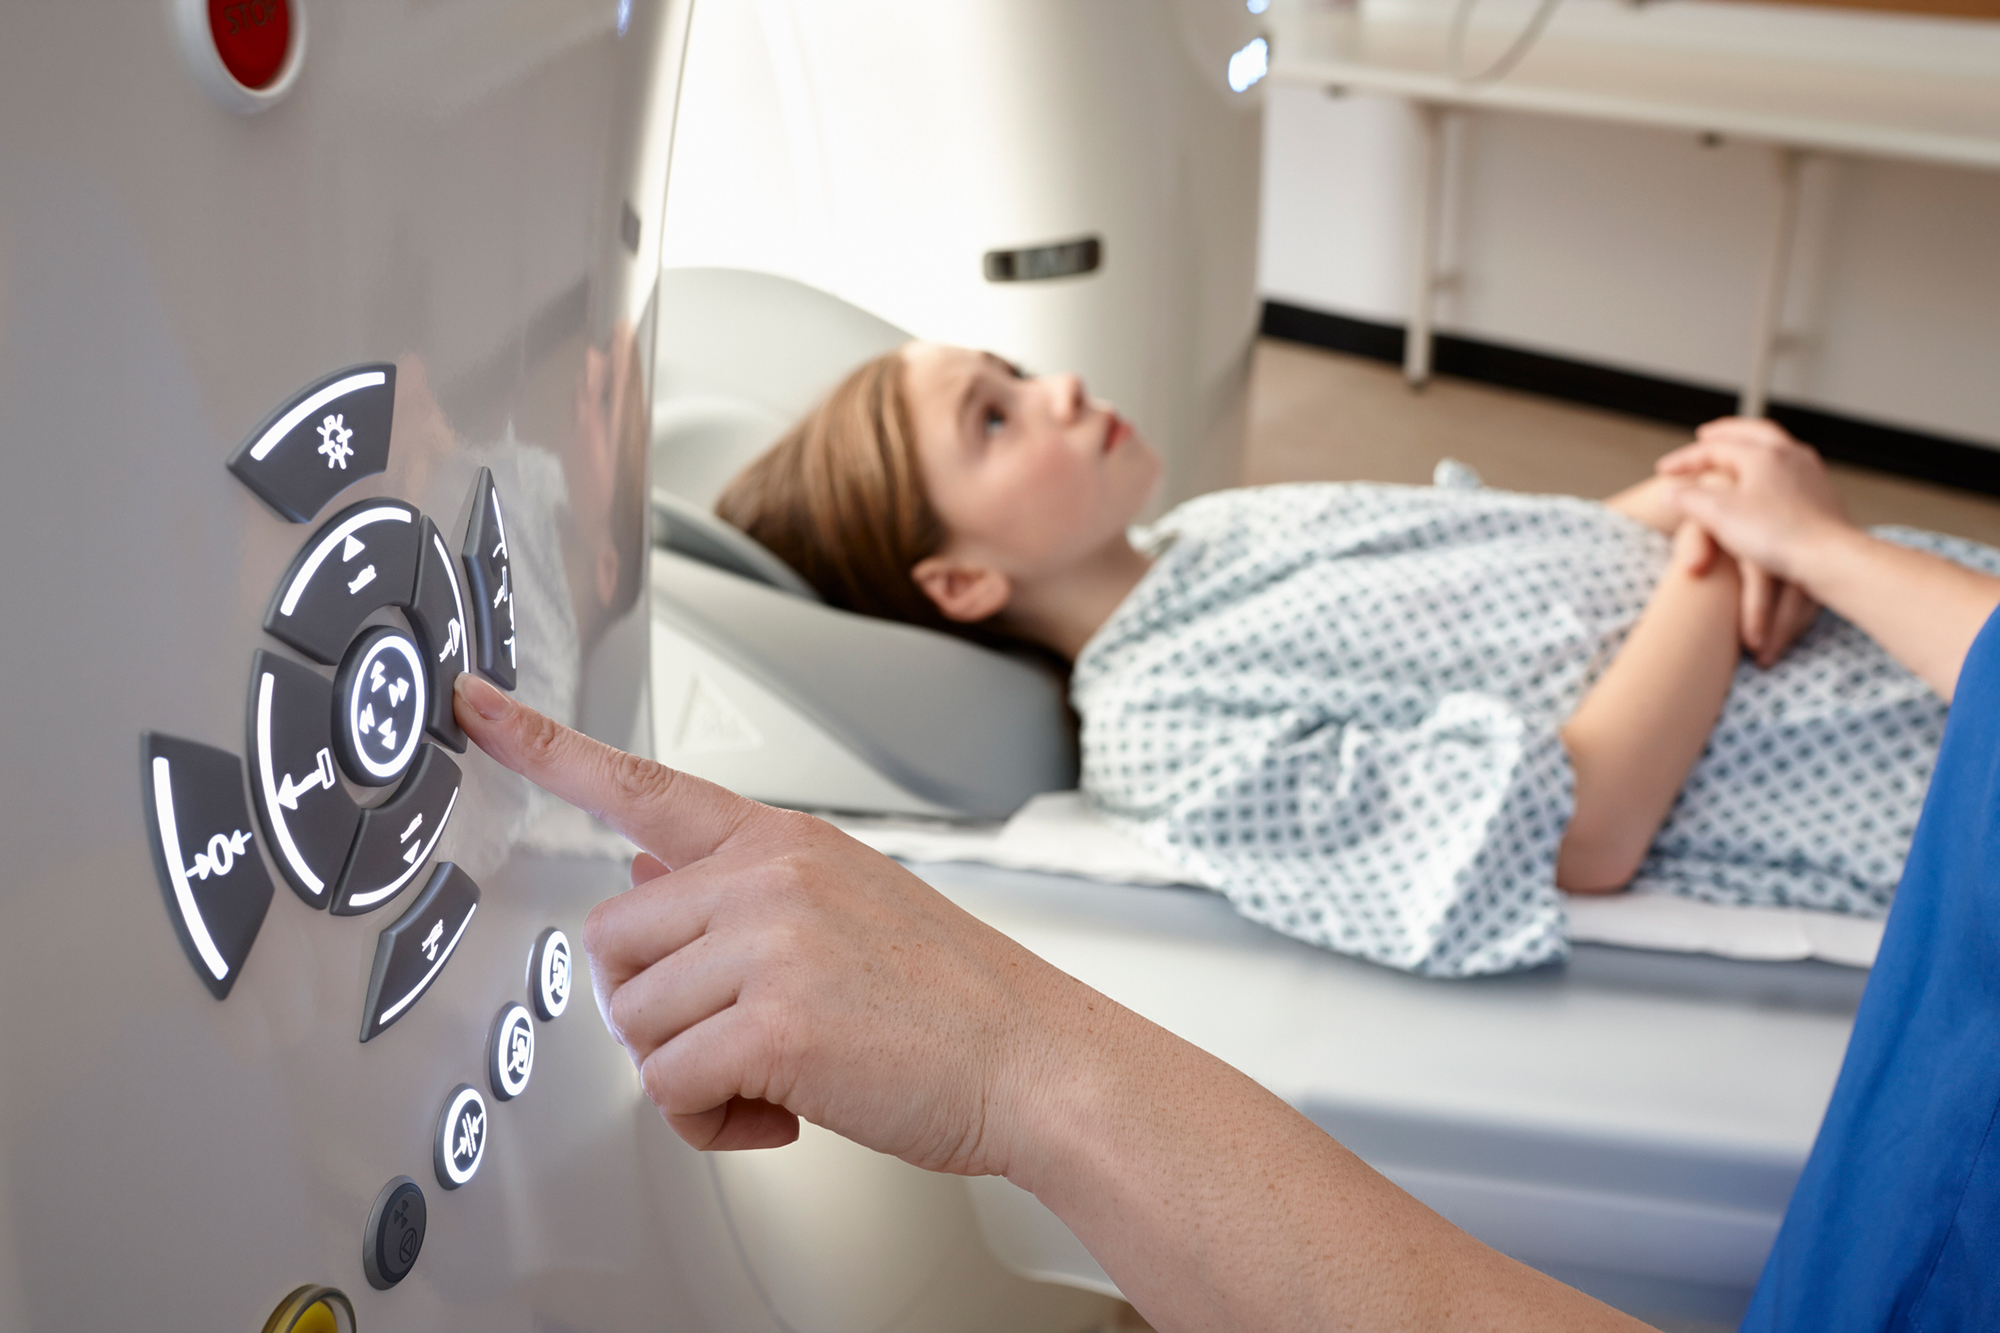 Pediatric Imaging Innovations Presented At The Rsna In Chicago In 2019